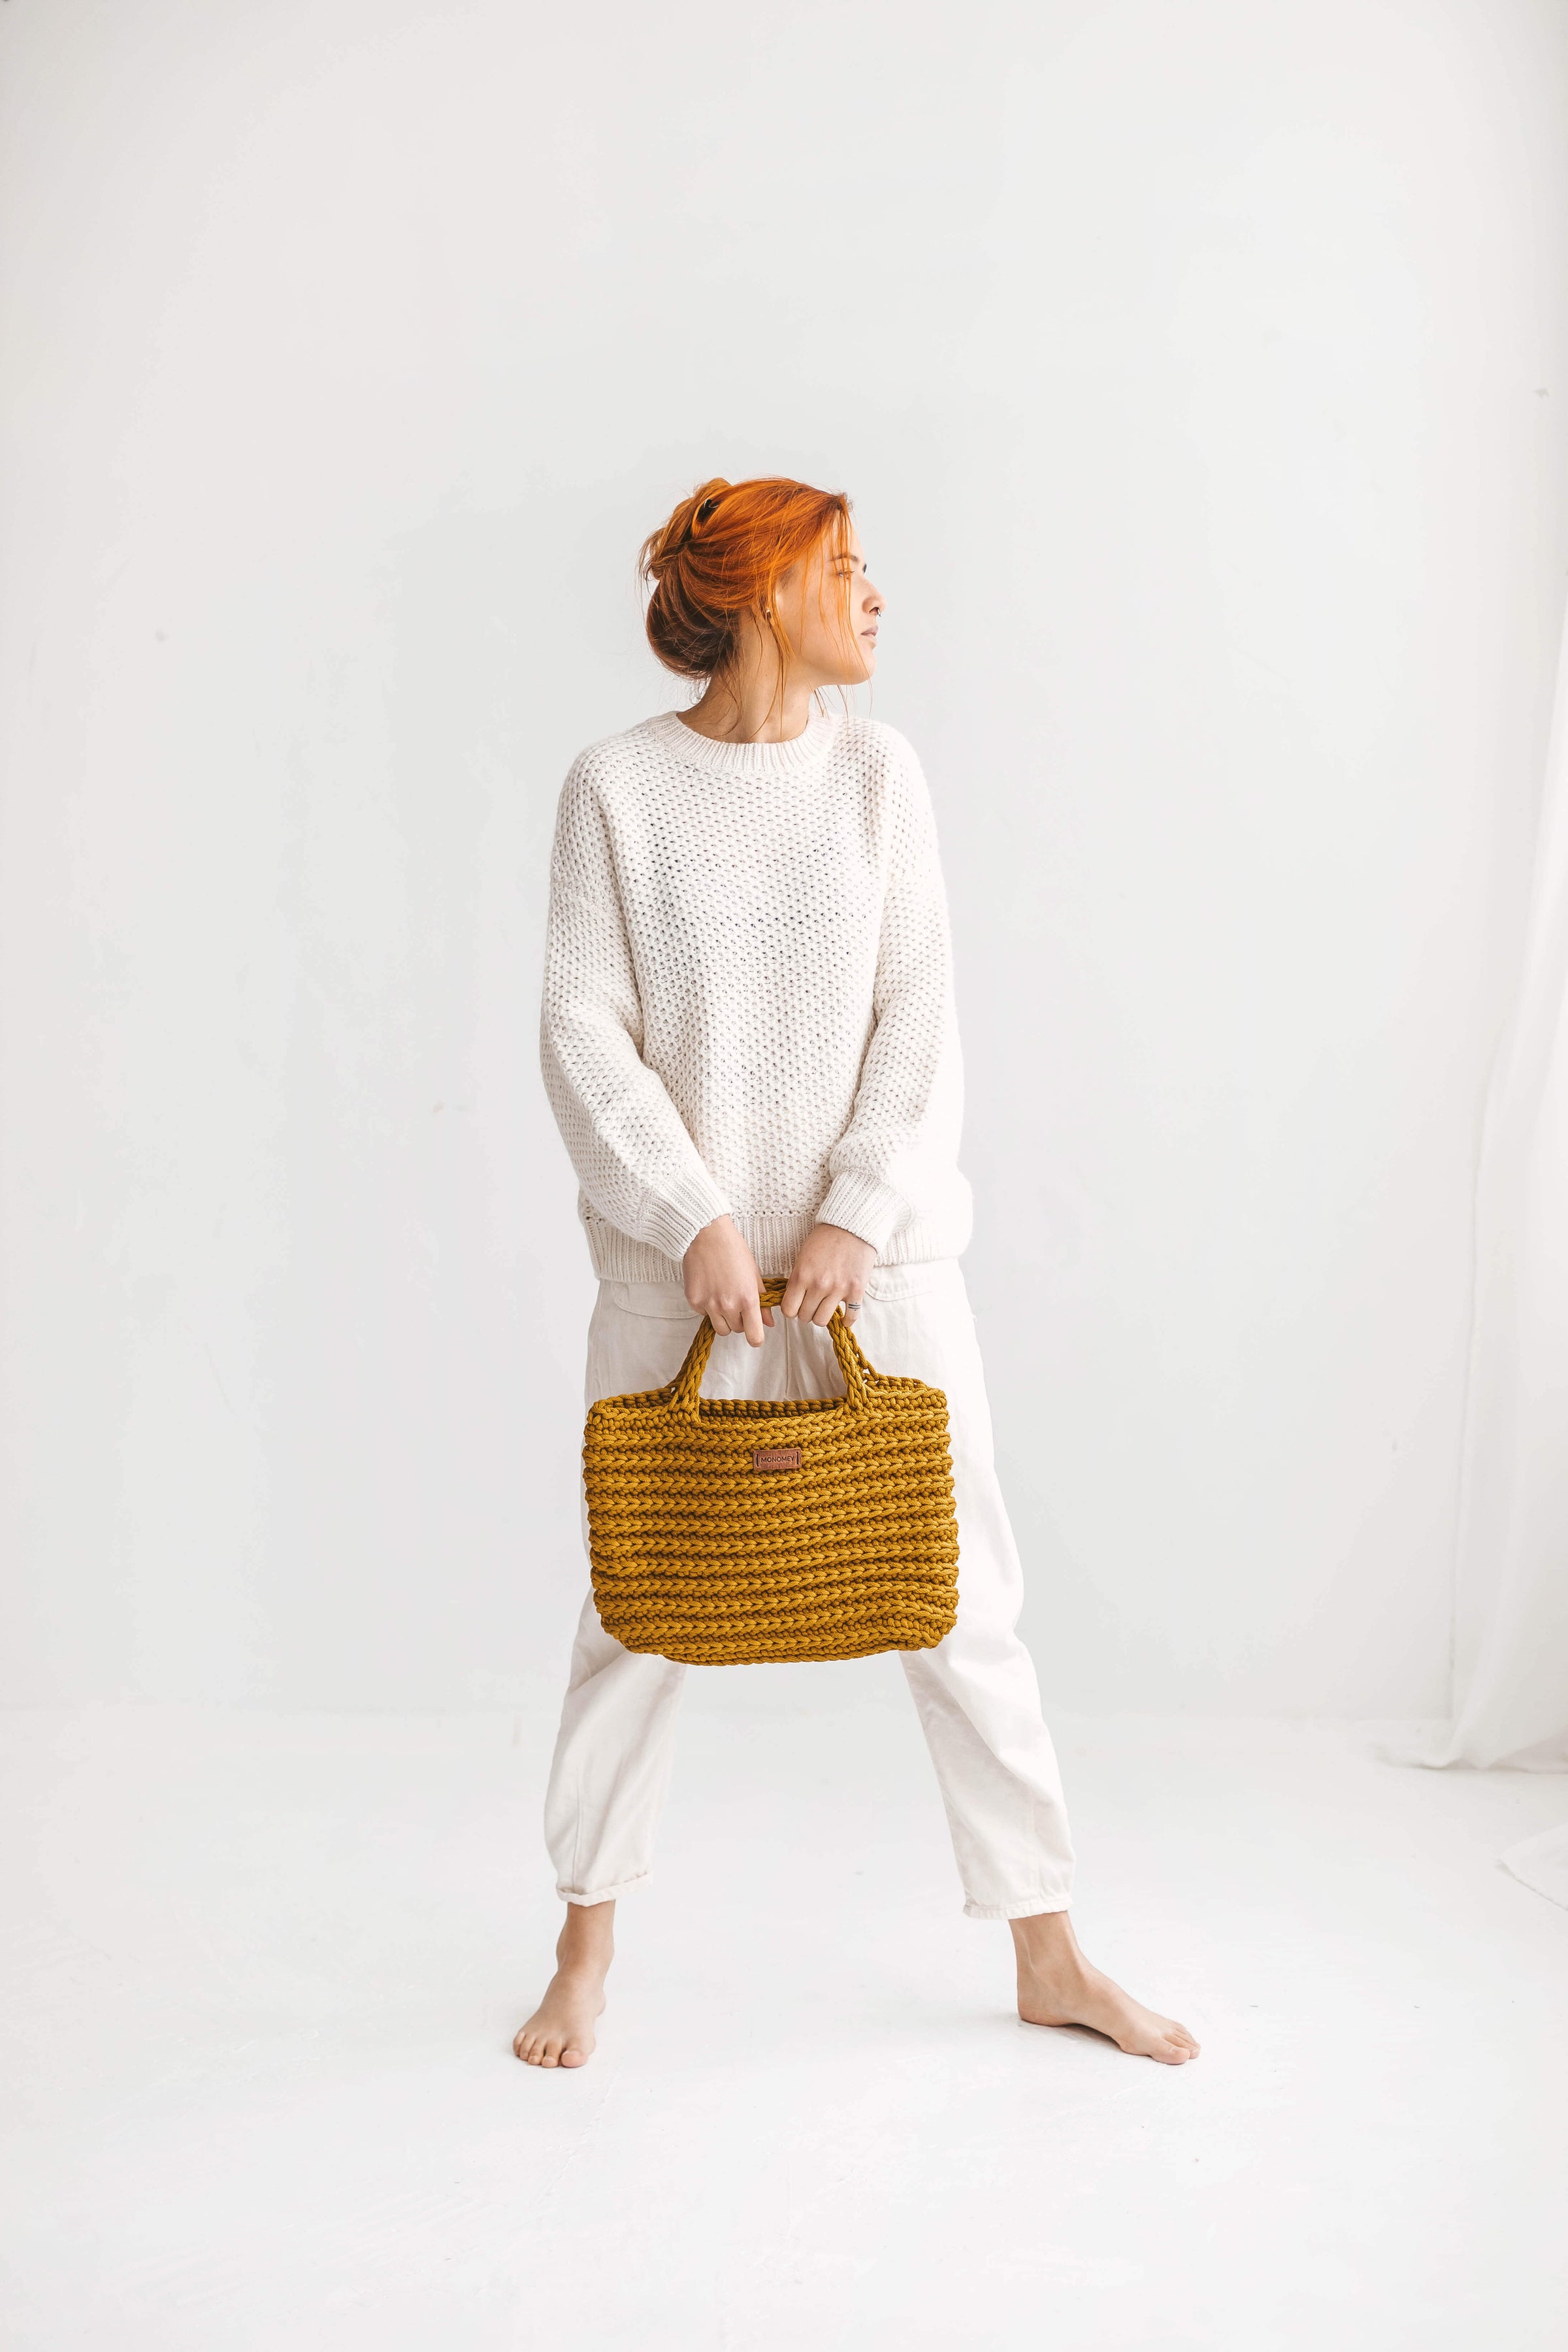 Introducing our New Kit! Crochet Bag With Cross Body Macramé Strap Kit —  cocoon&me